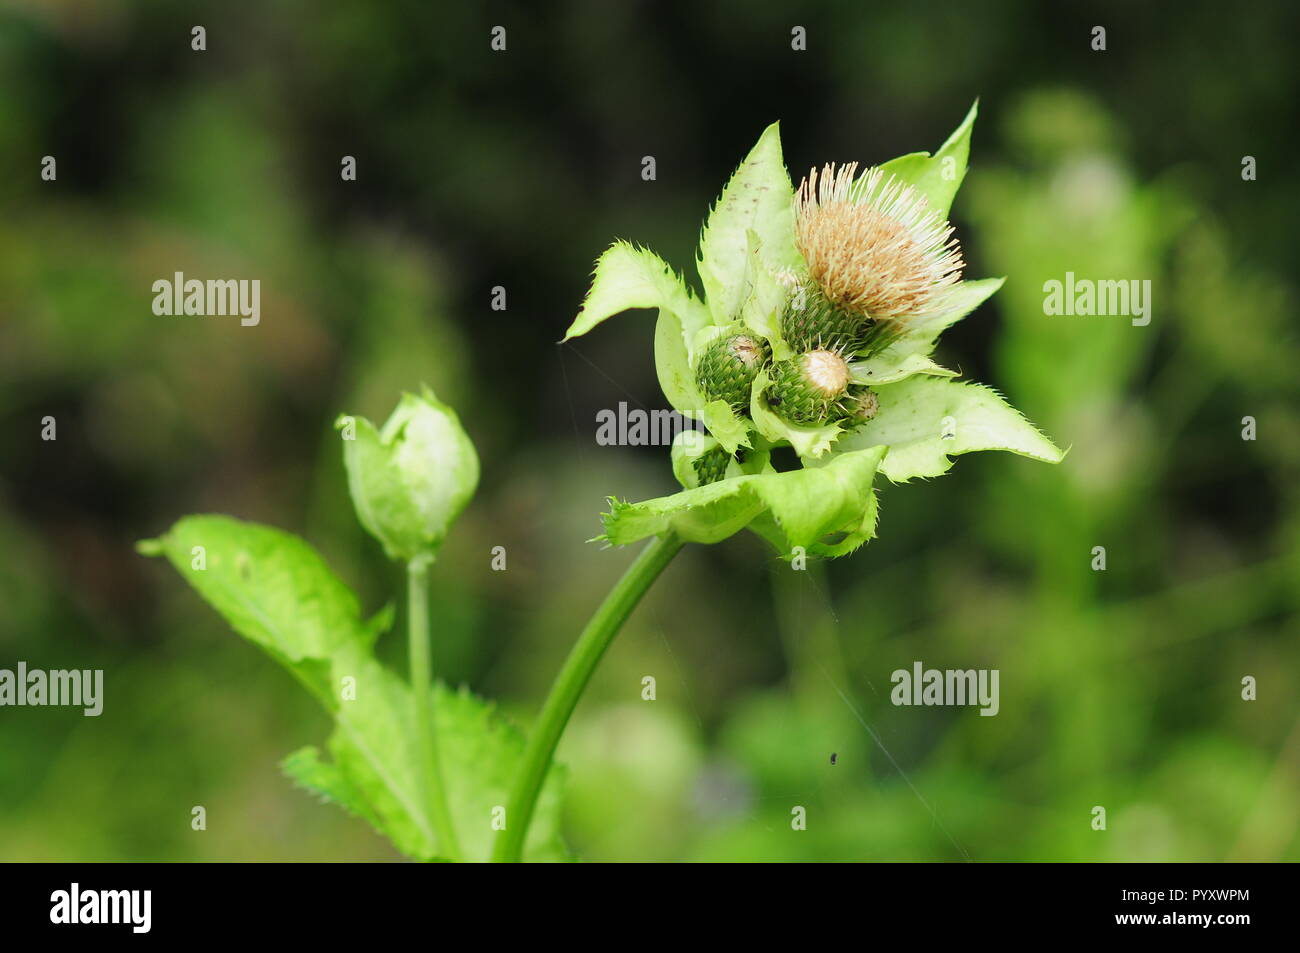 Cabbage thistle or Siberian thistle, Cirsium oleraceum, sunflower family. herbaceous perennial plant. close-up of head with seeds. Stock Photo